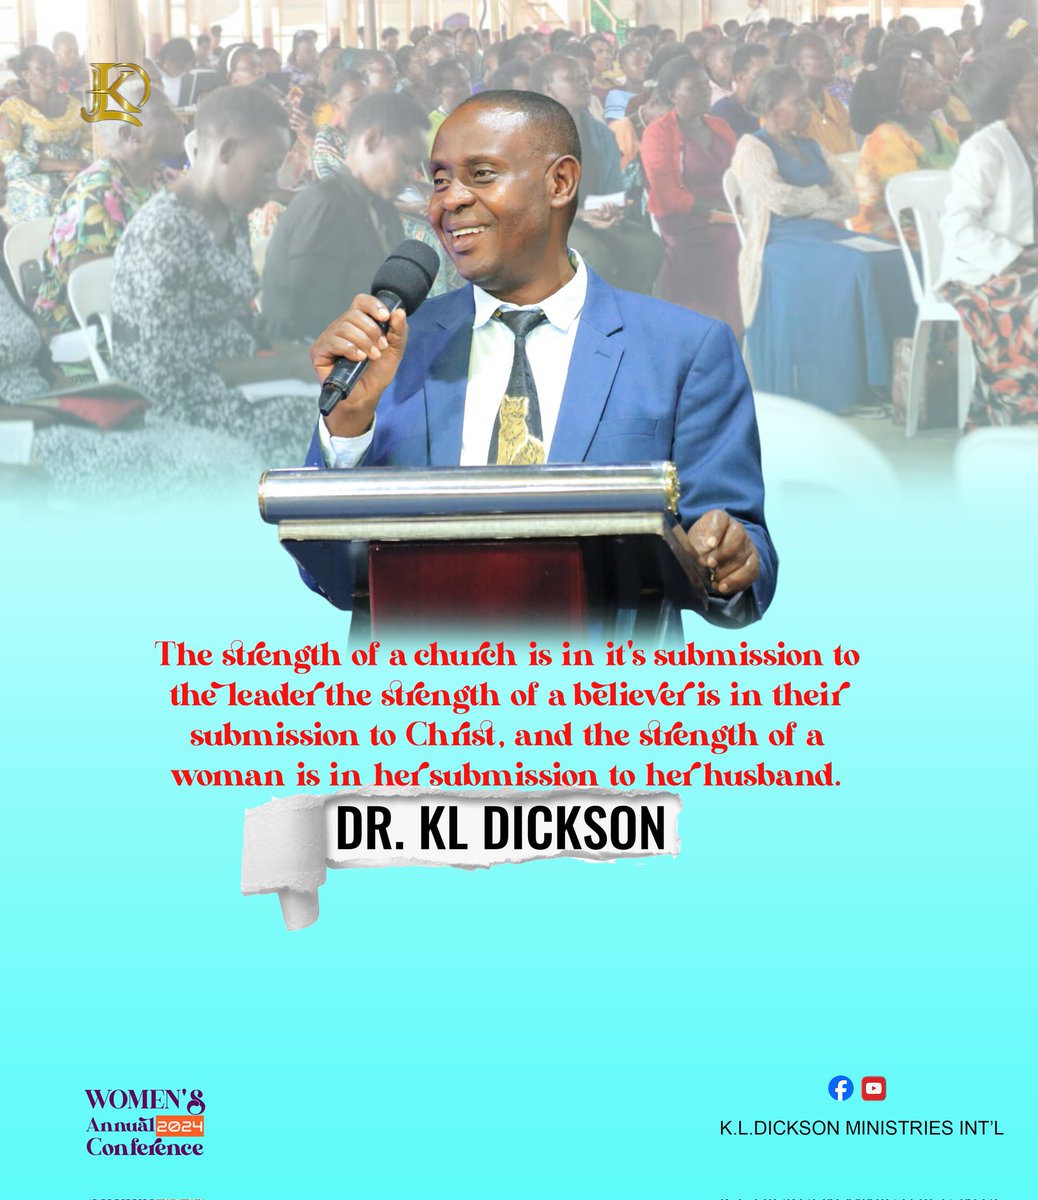 The strength of a church is in it's submission to the leader; the strength of a believer is in their submission to Christ, and the strength of a woman is in her submission to her husband.

#DrKLDicksonQuotes

#MarriageQuotes 
#WomensConference2024
#CFCFortPortal 
#WEMAt44